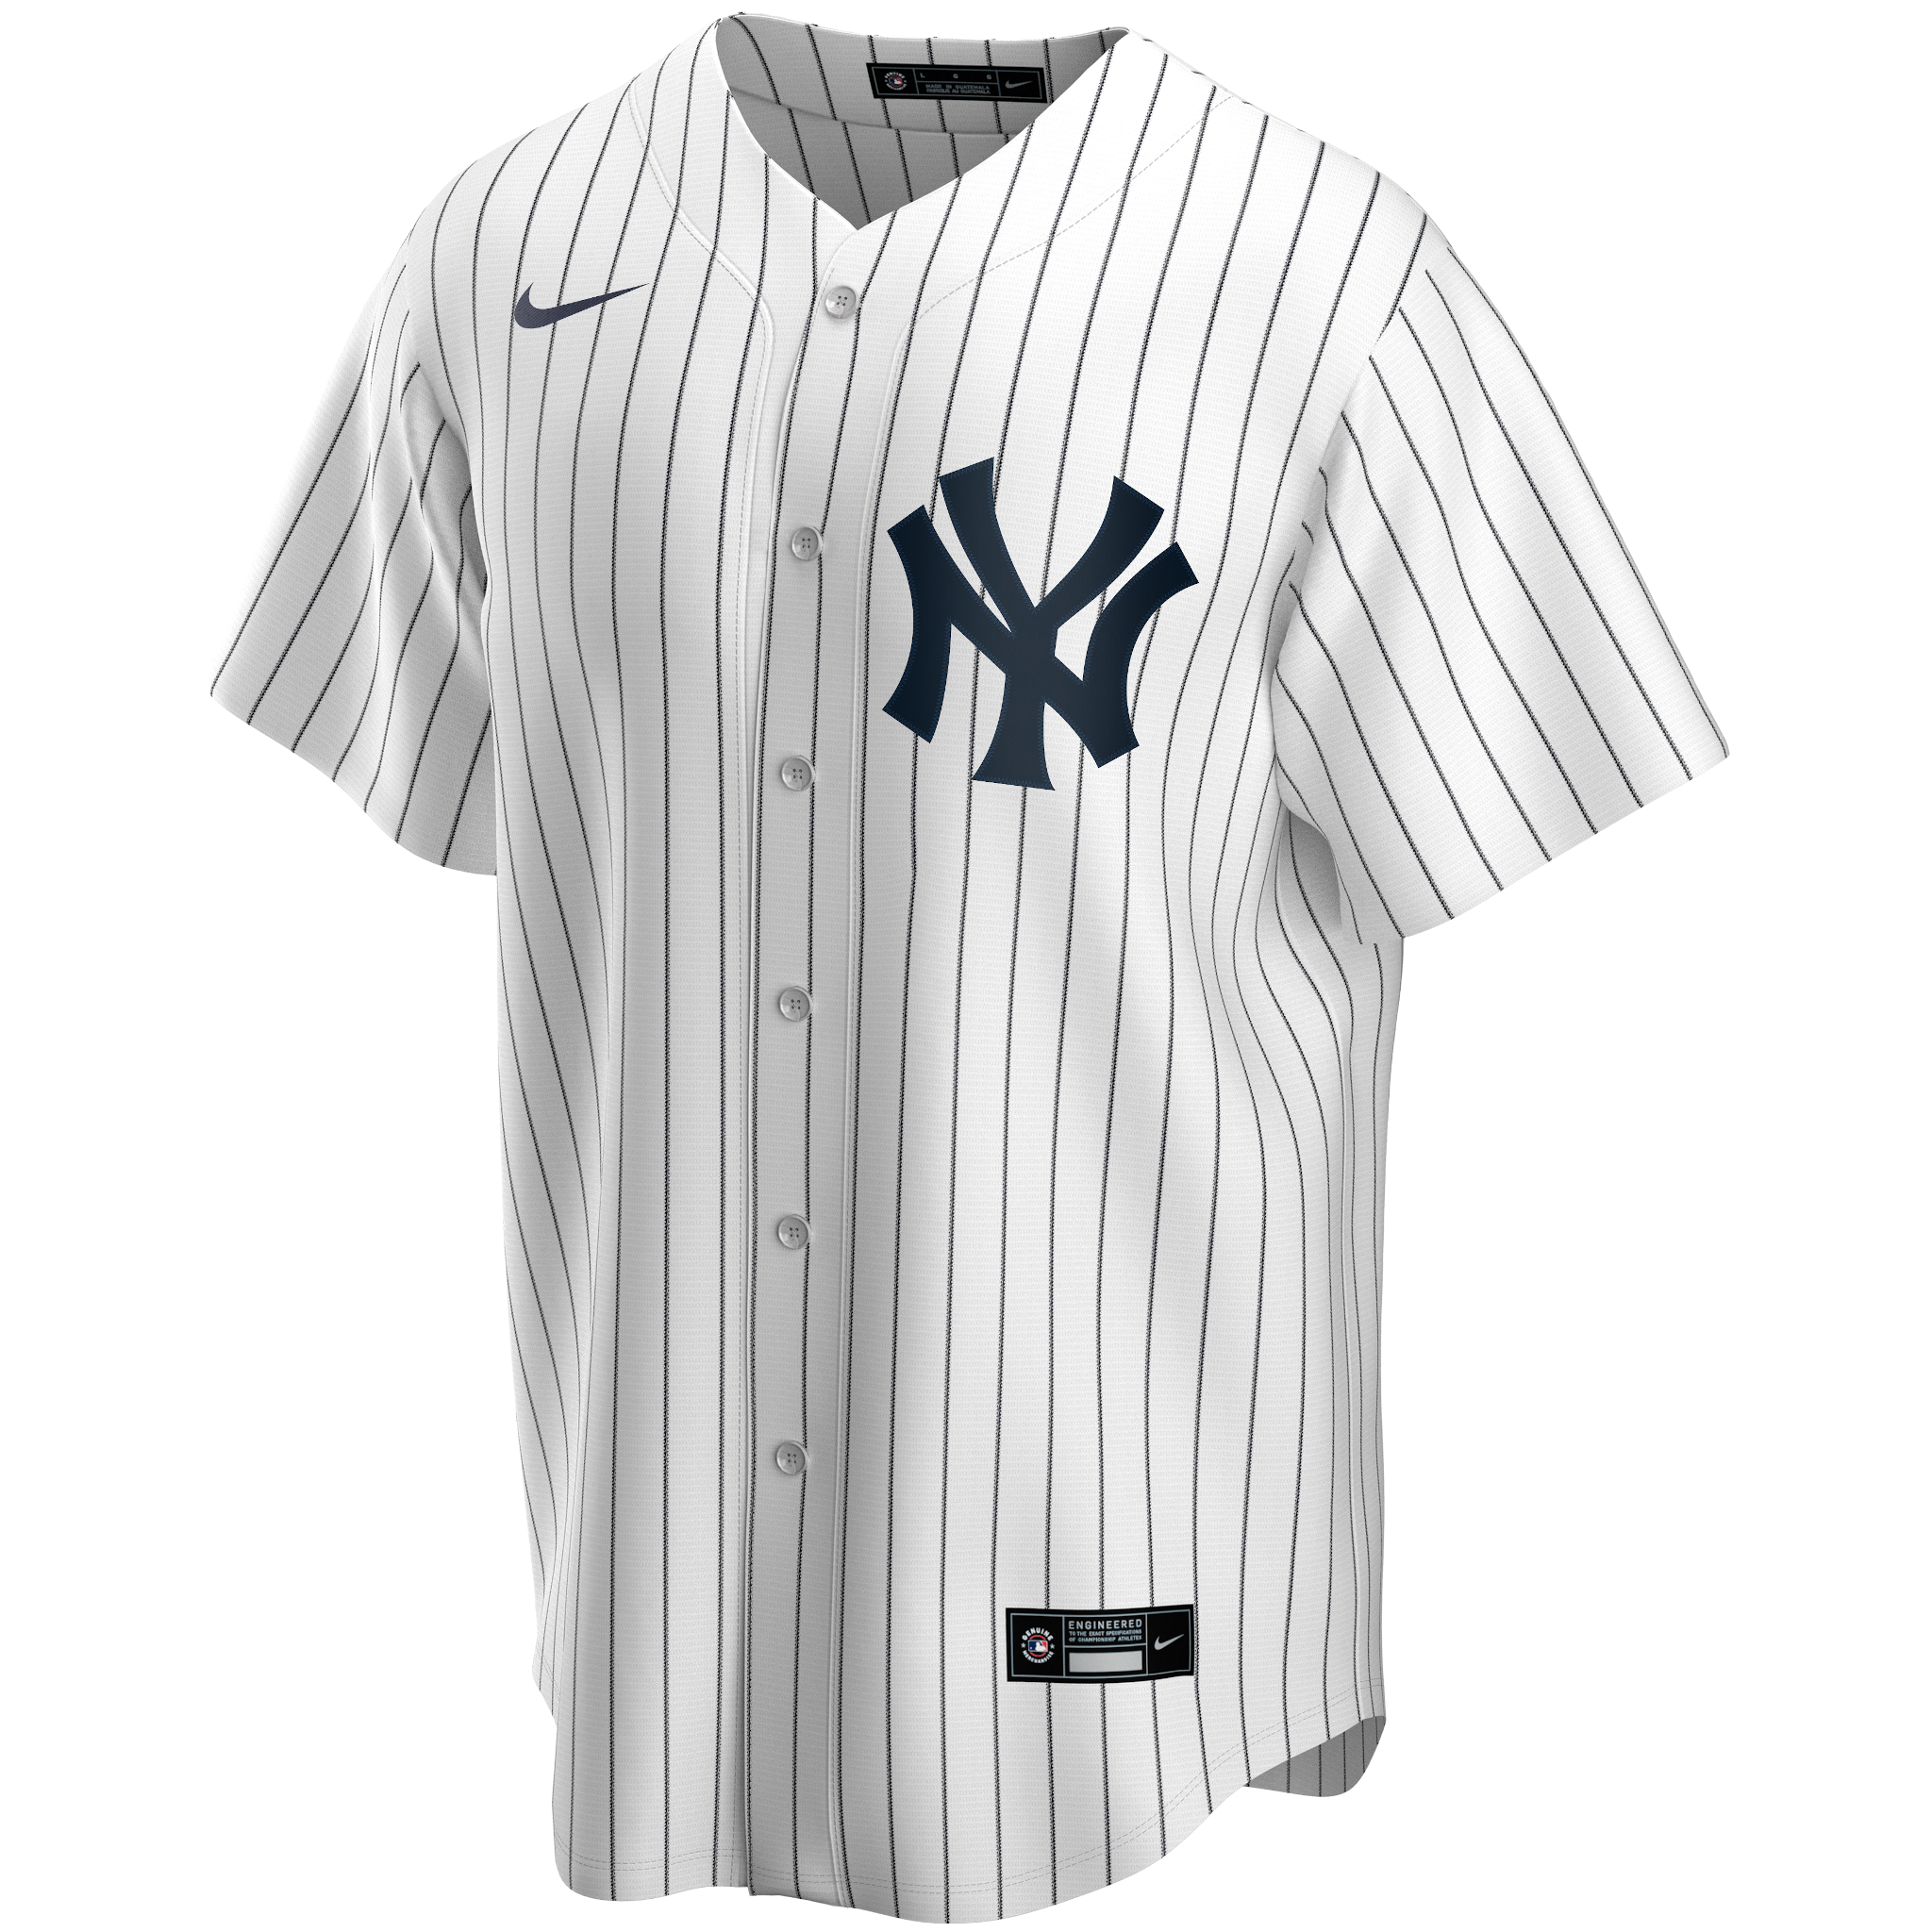 personalized yankee jersey for toddlers